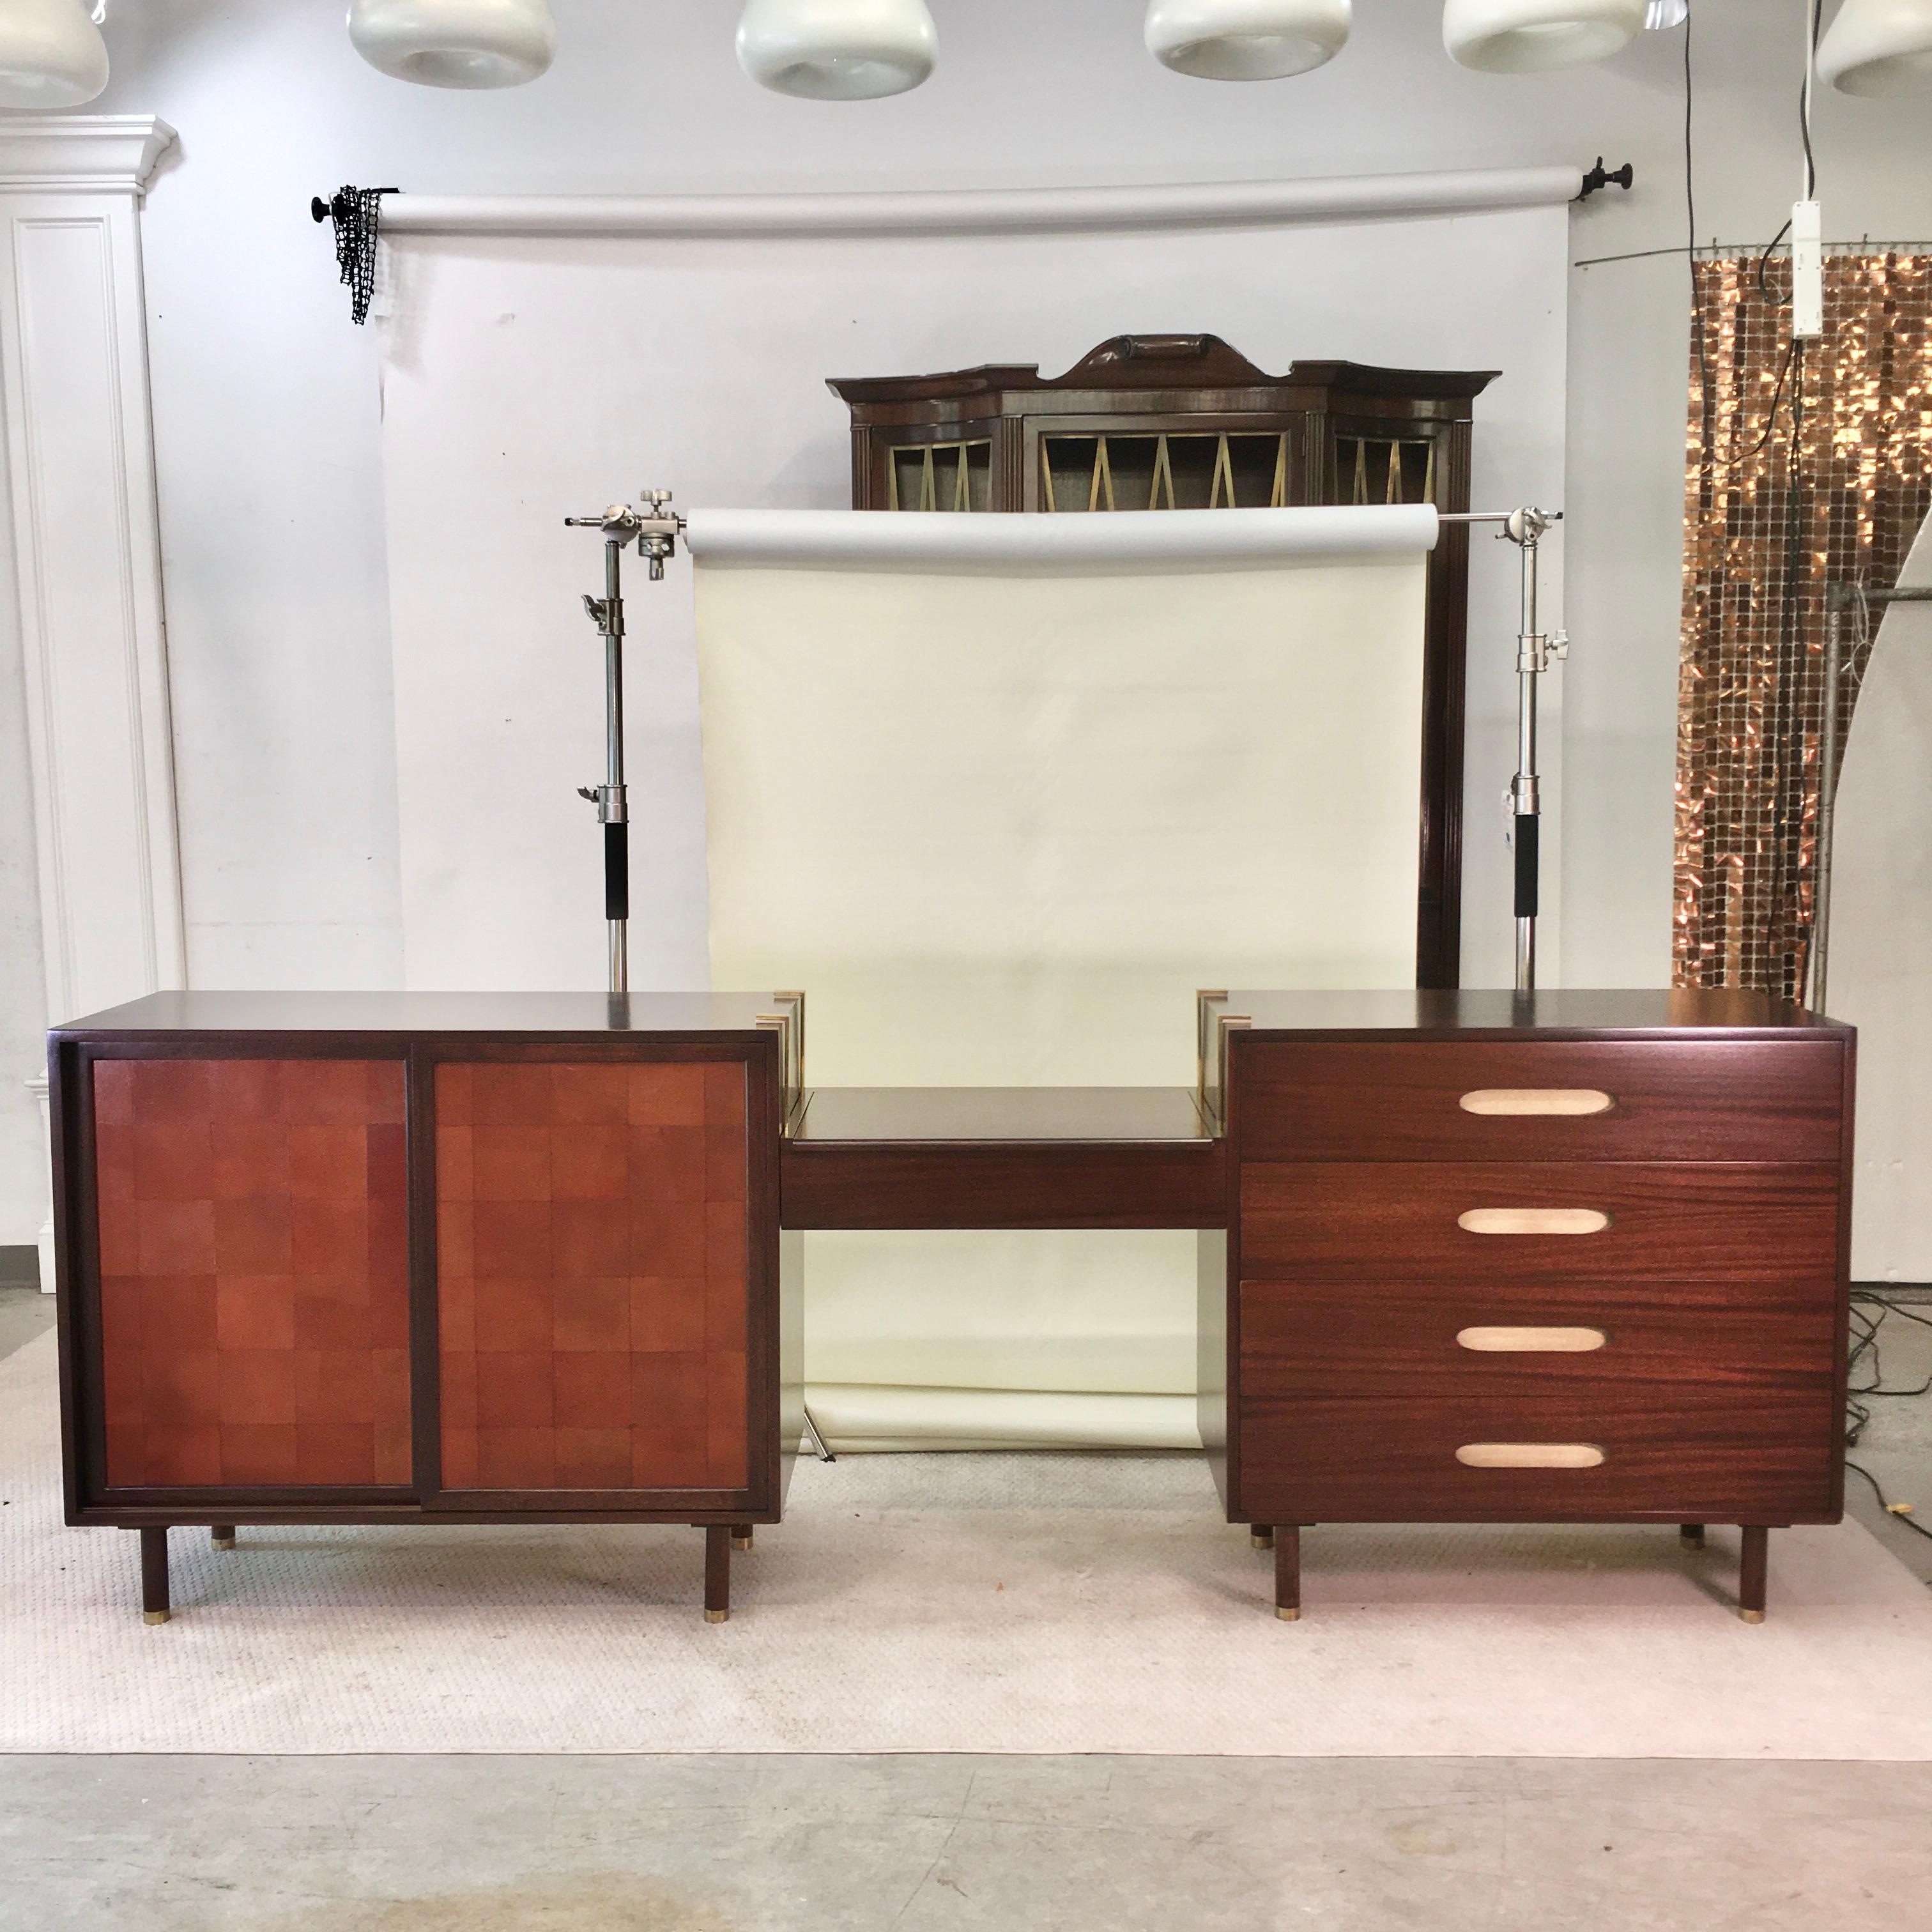 Two beautifully restored complimentary chests flanking a hanging vanity case from Harvey Probber's 